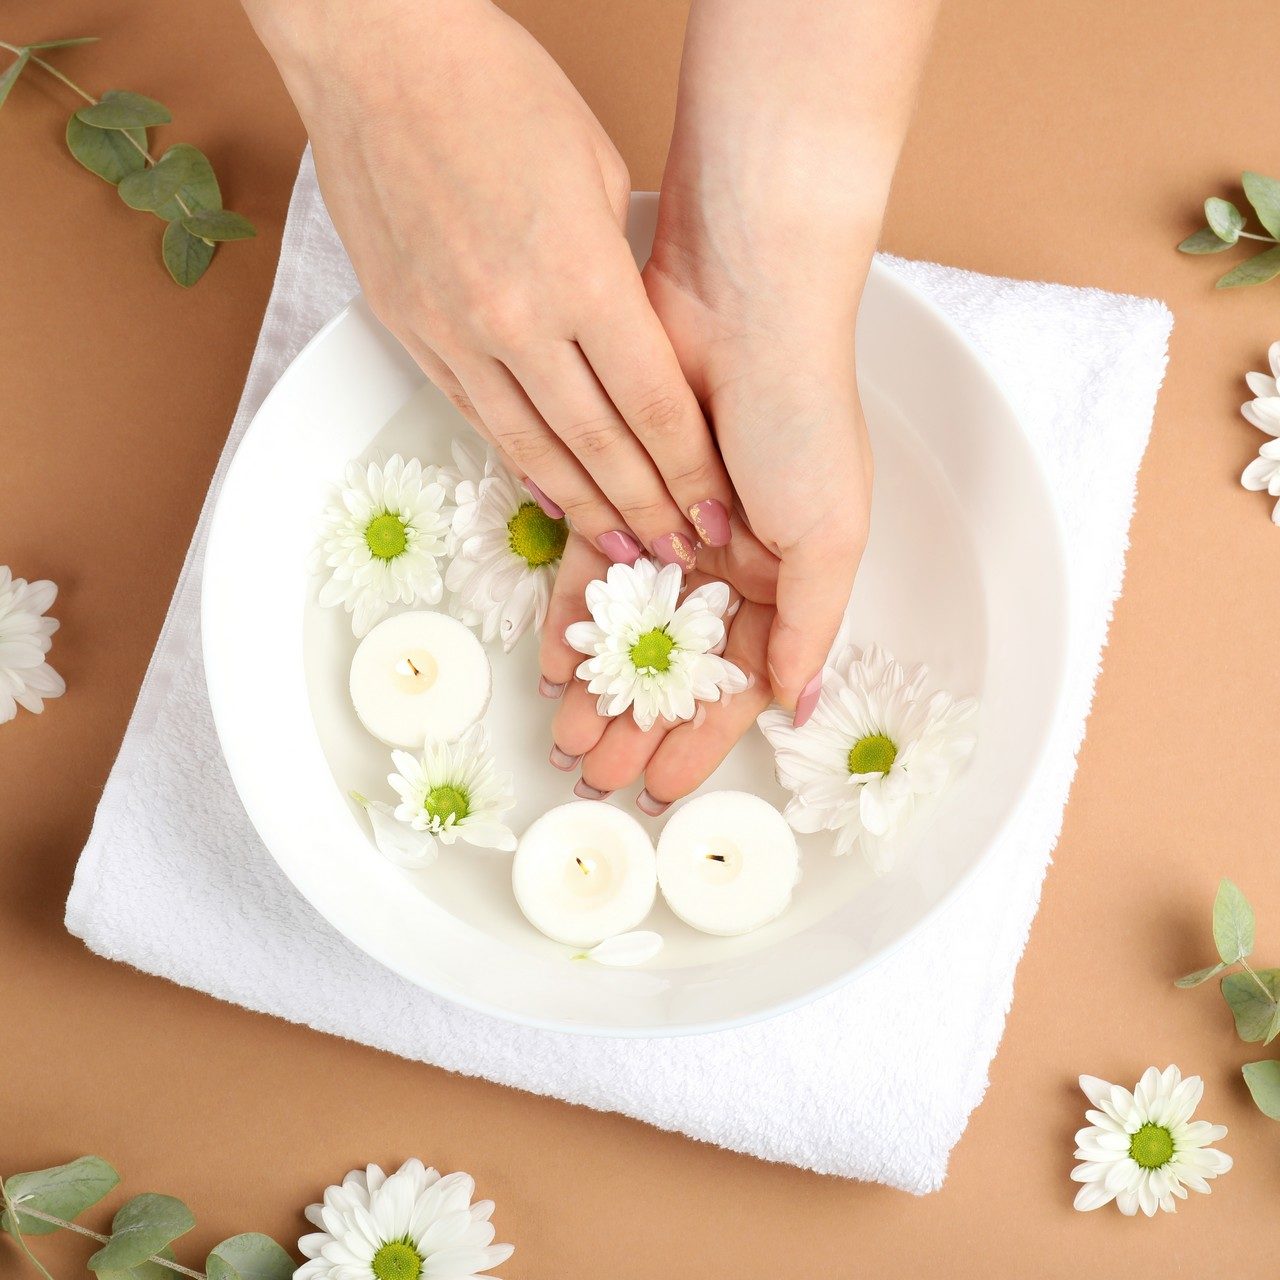 Concept of hand care on beige background with flowers